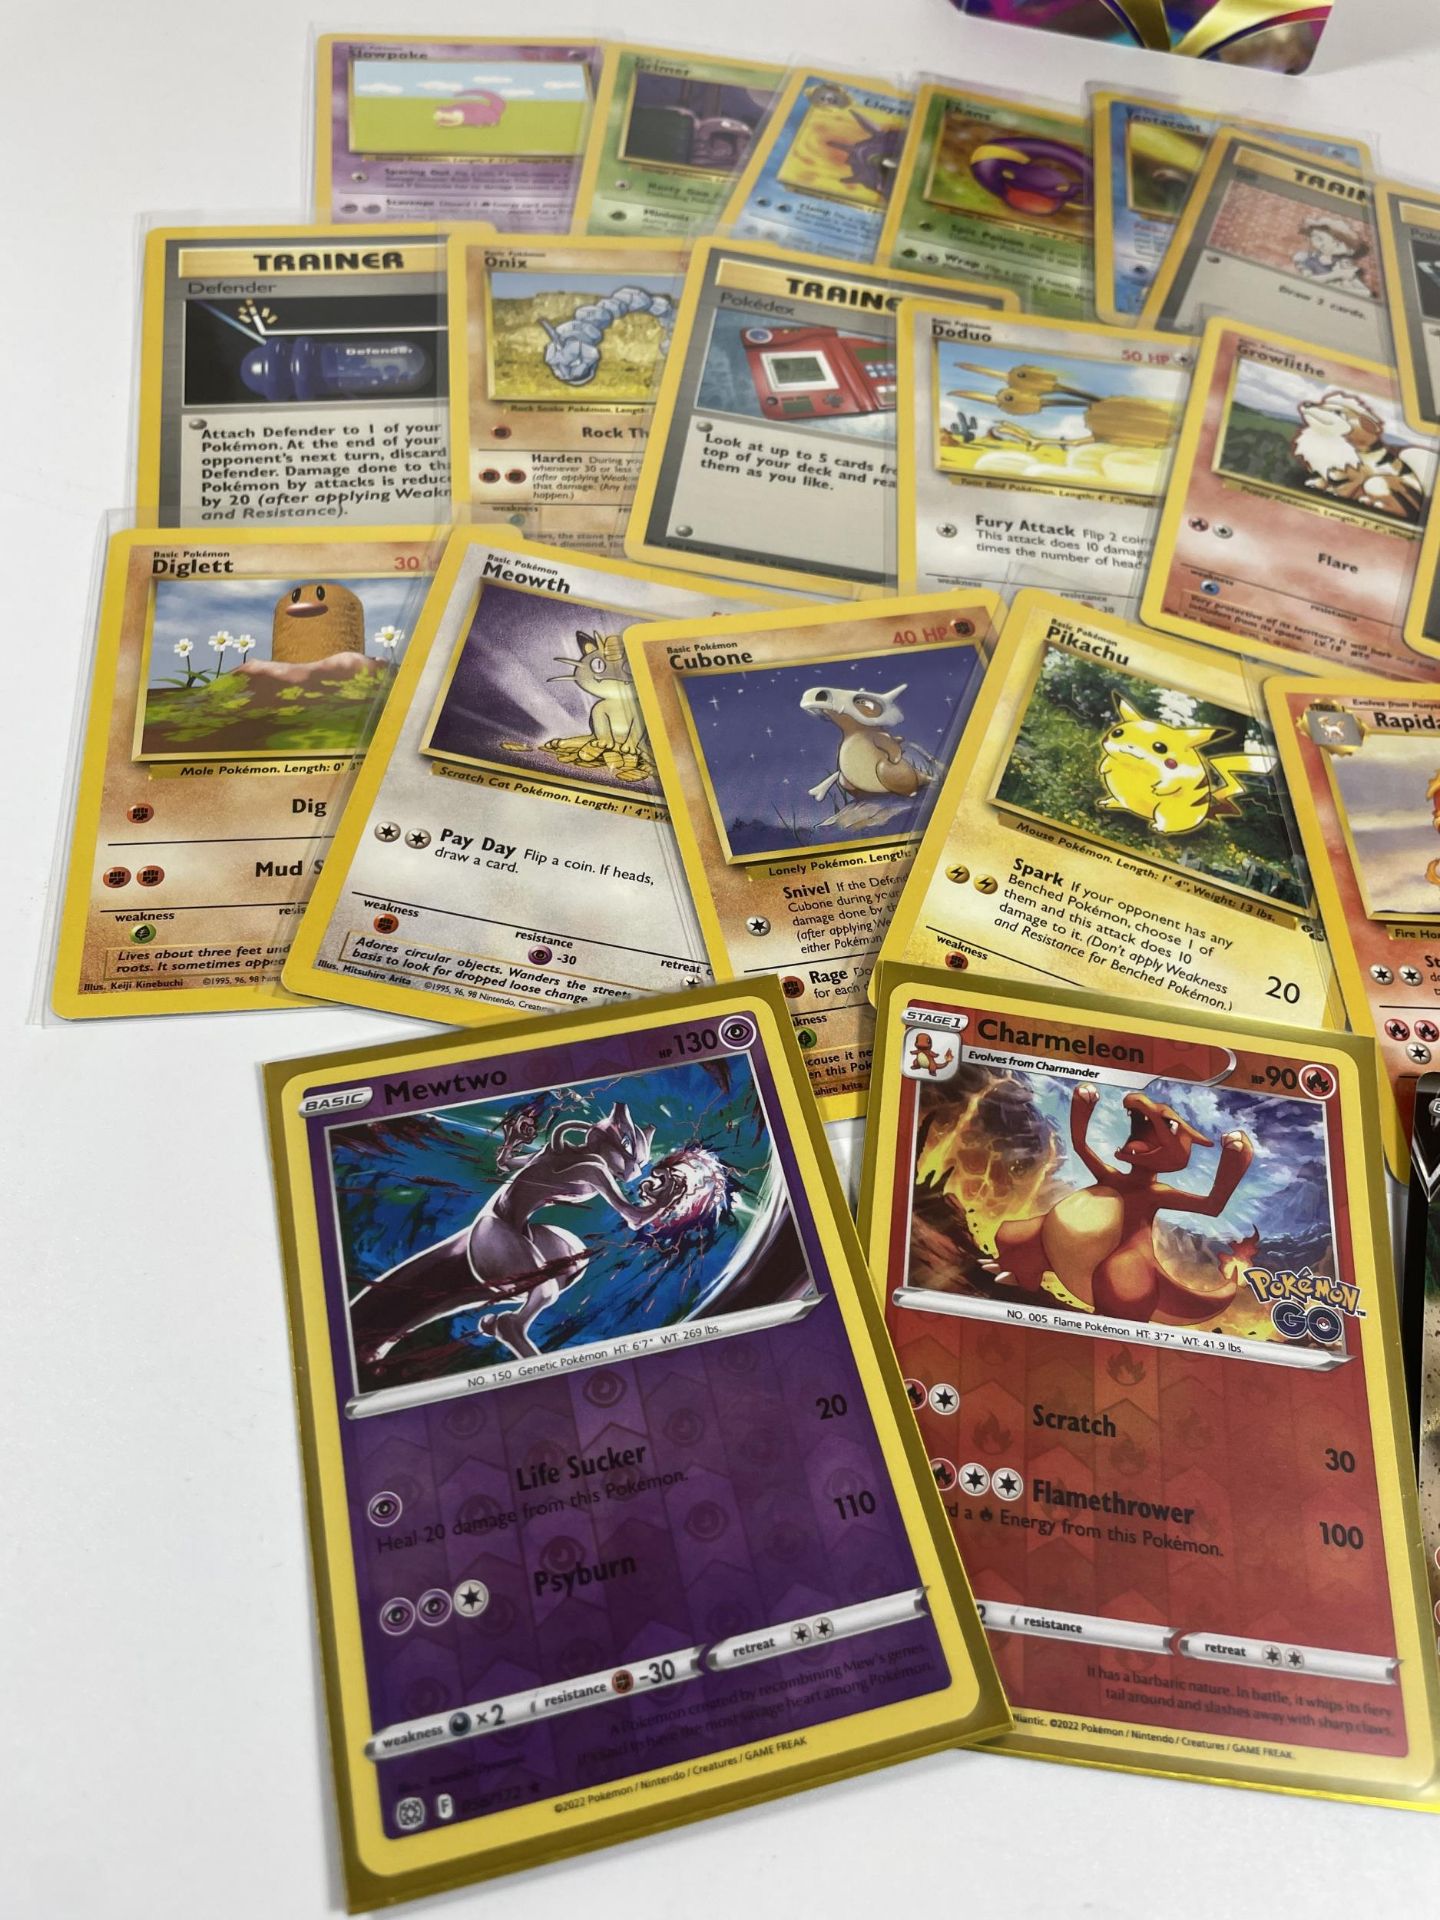 A SMALL POKEMON FOLDER OF CARDS - JUNGLE SET 1999 PIKACHU, FURTHER WOTC CARDS, MEWTWO RADIANT - Image 3 of 5